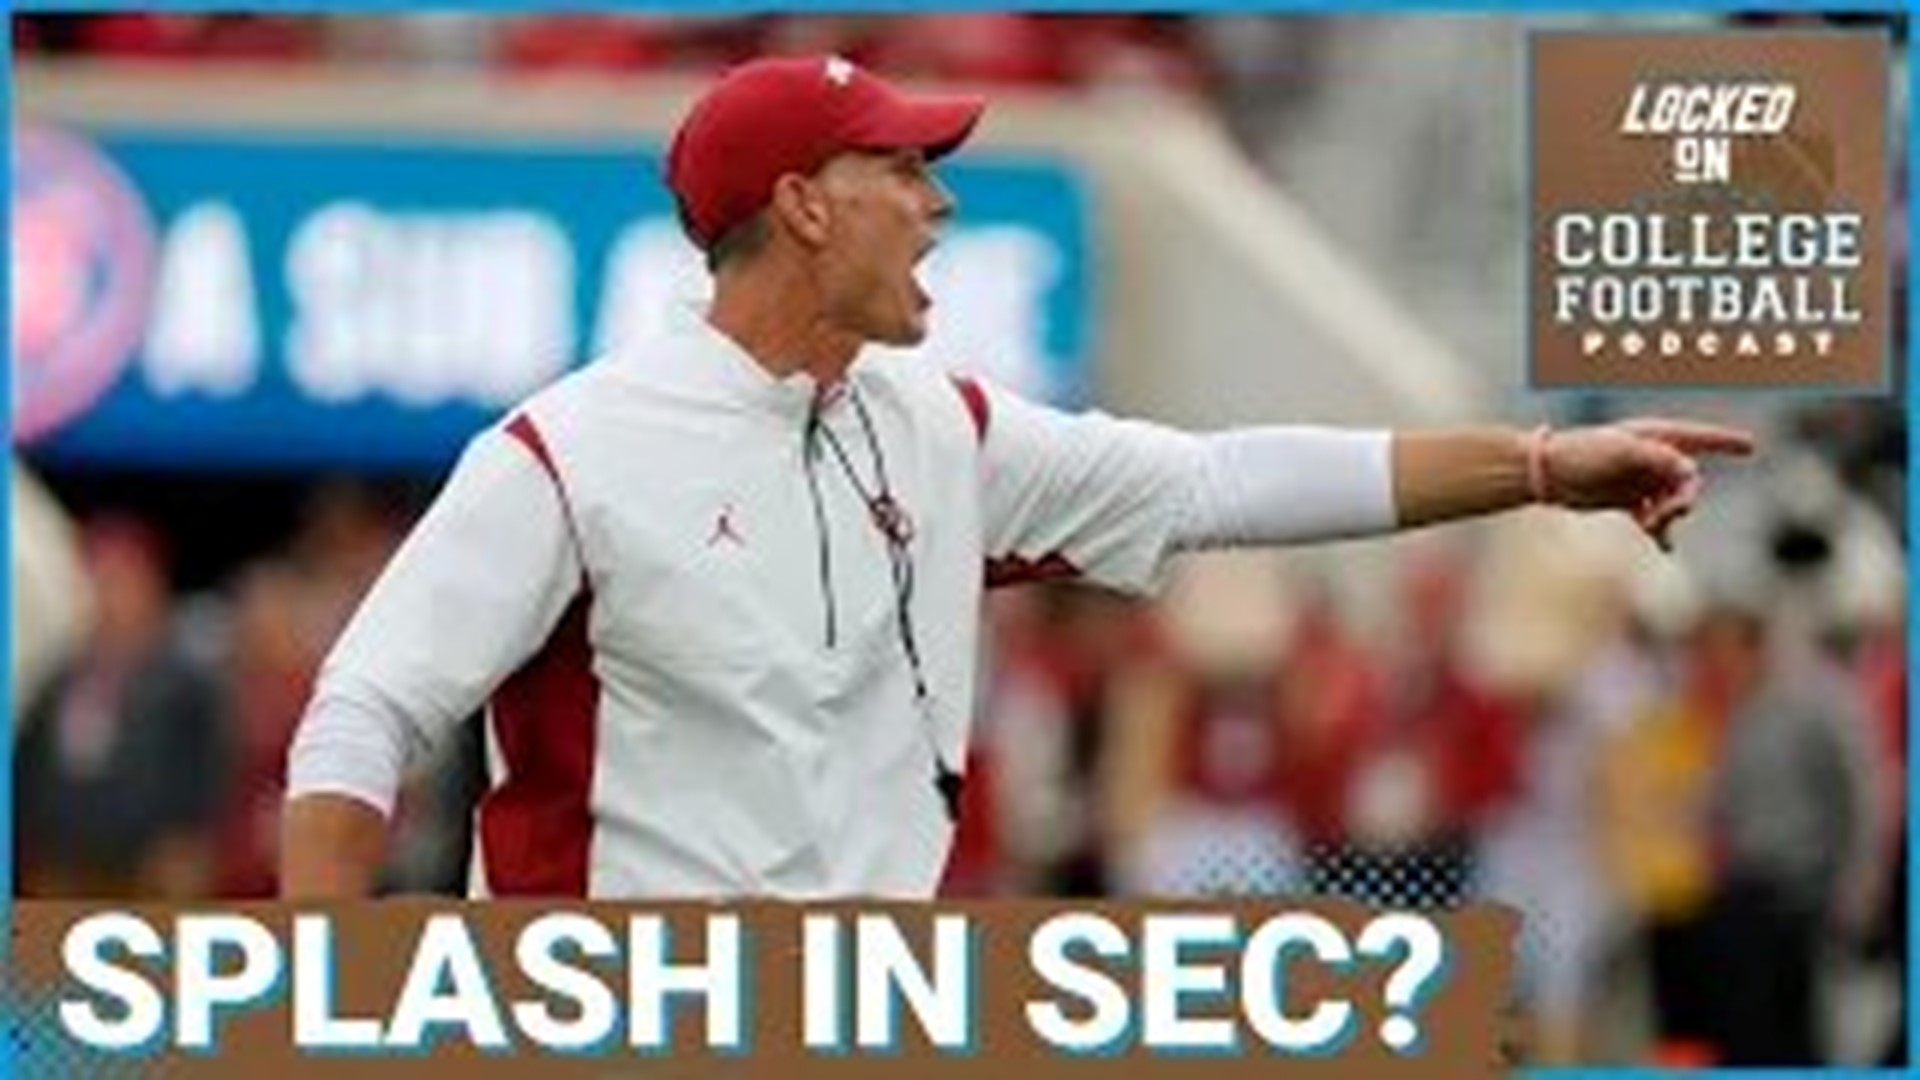 Oklahoma is joining the SEC this year with far less hype than Texas--but they're working to change that in the transfer portal.